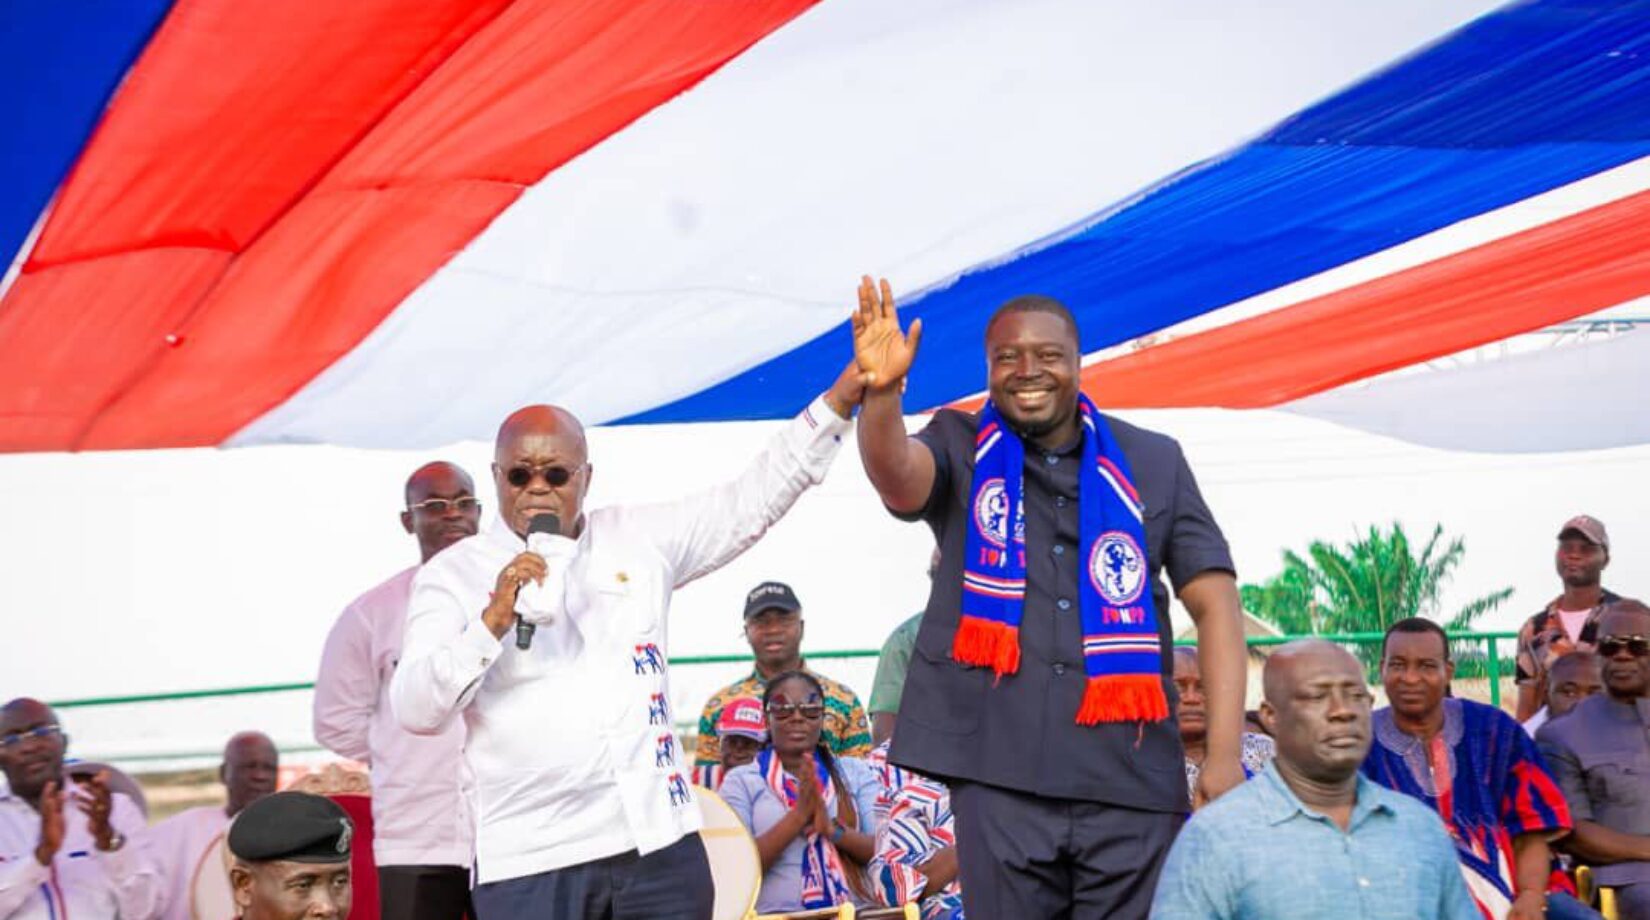 Ejisu by-election: Aduomi’s vote rigging allegations baseless, ignore him – Akufo-Addo fires back